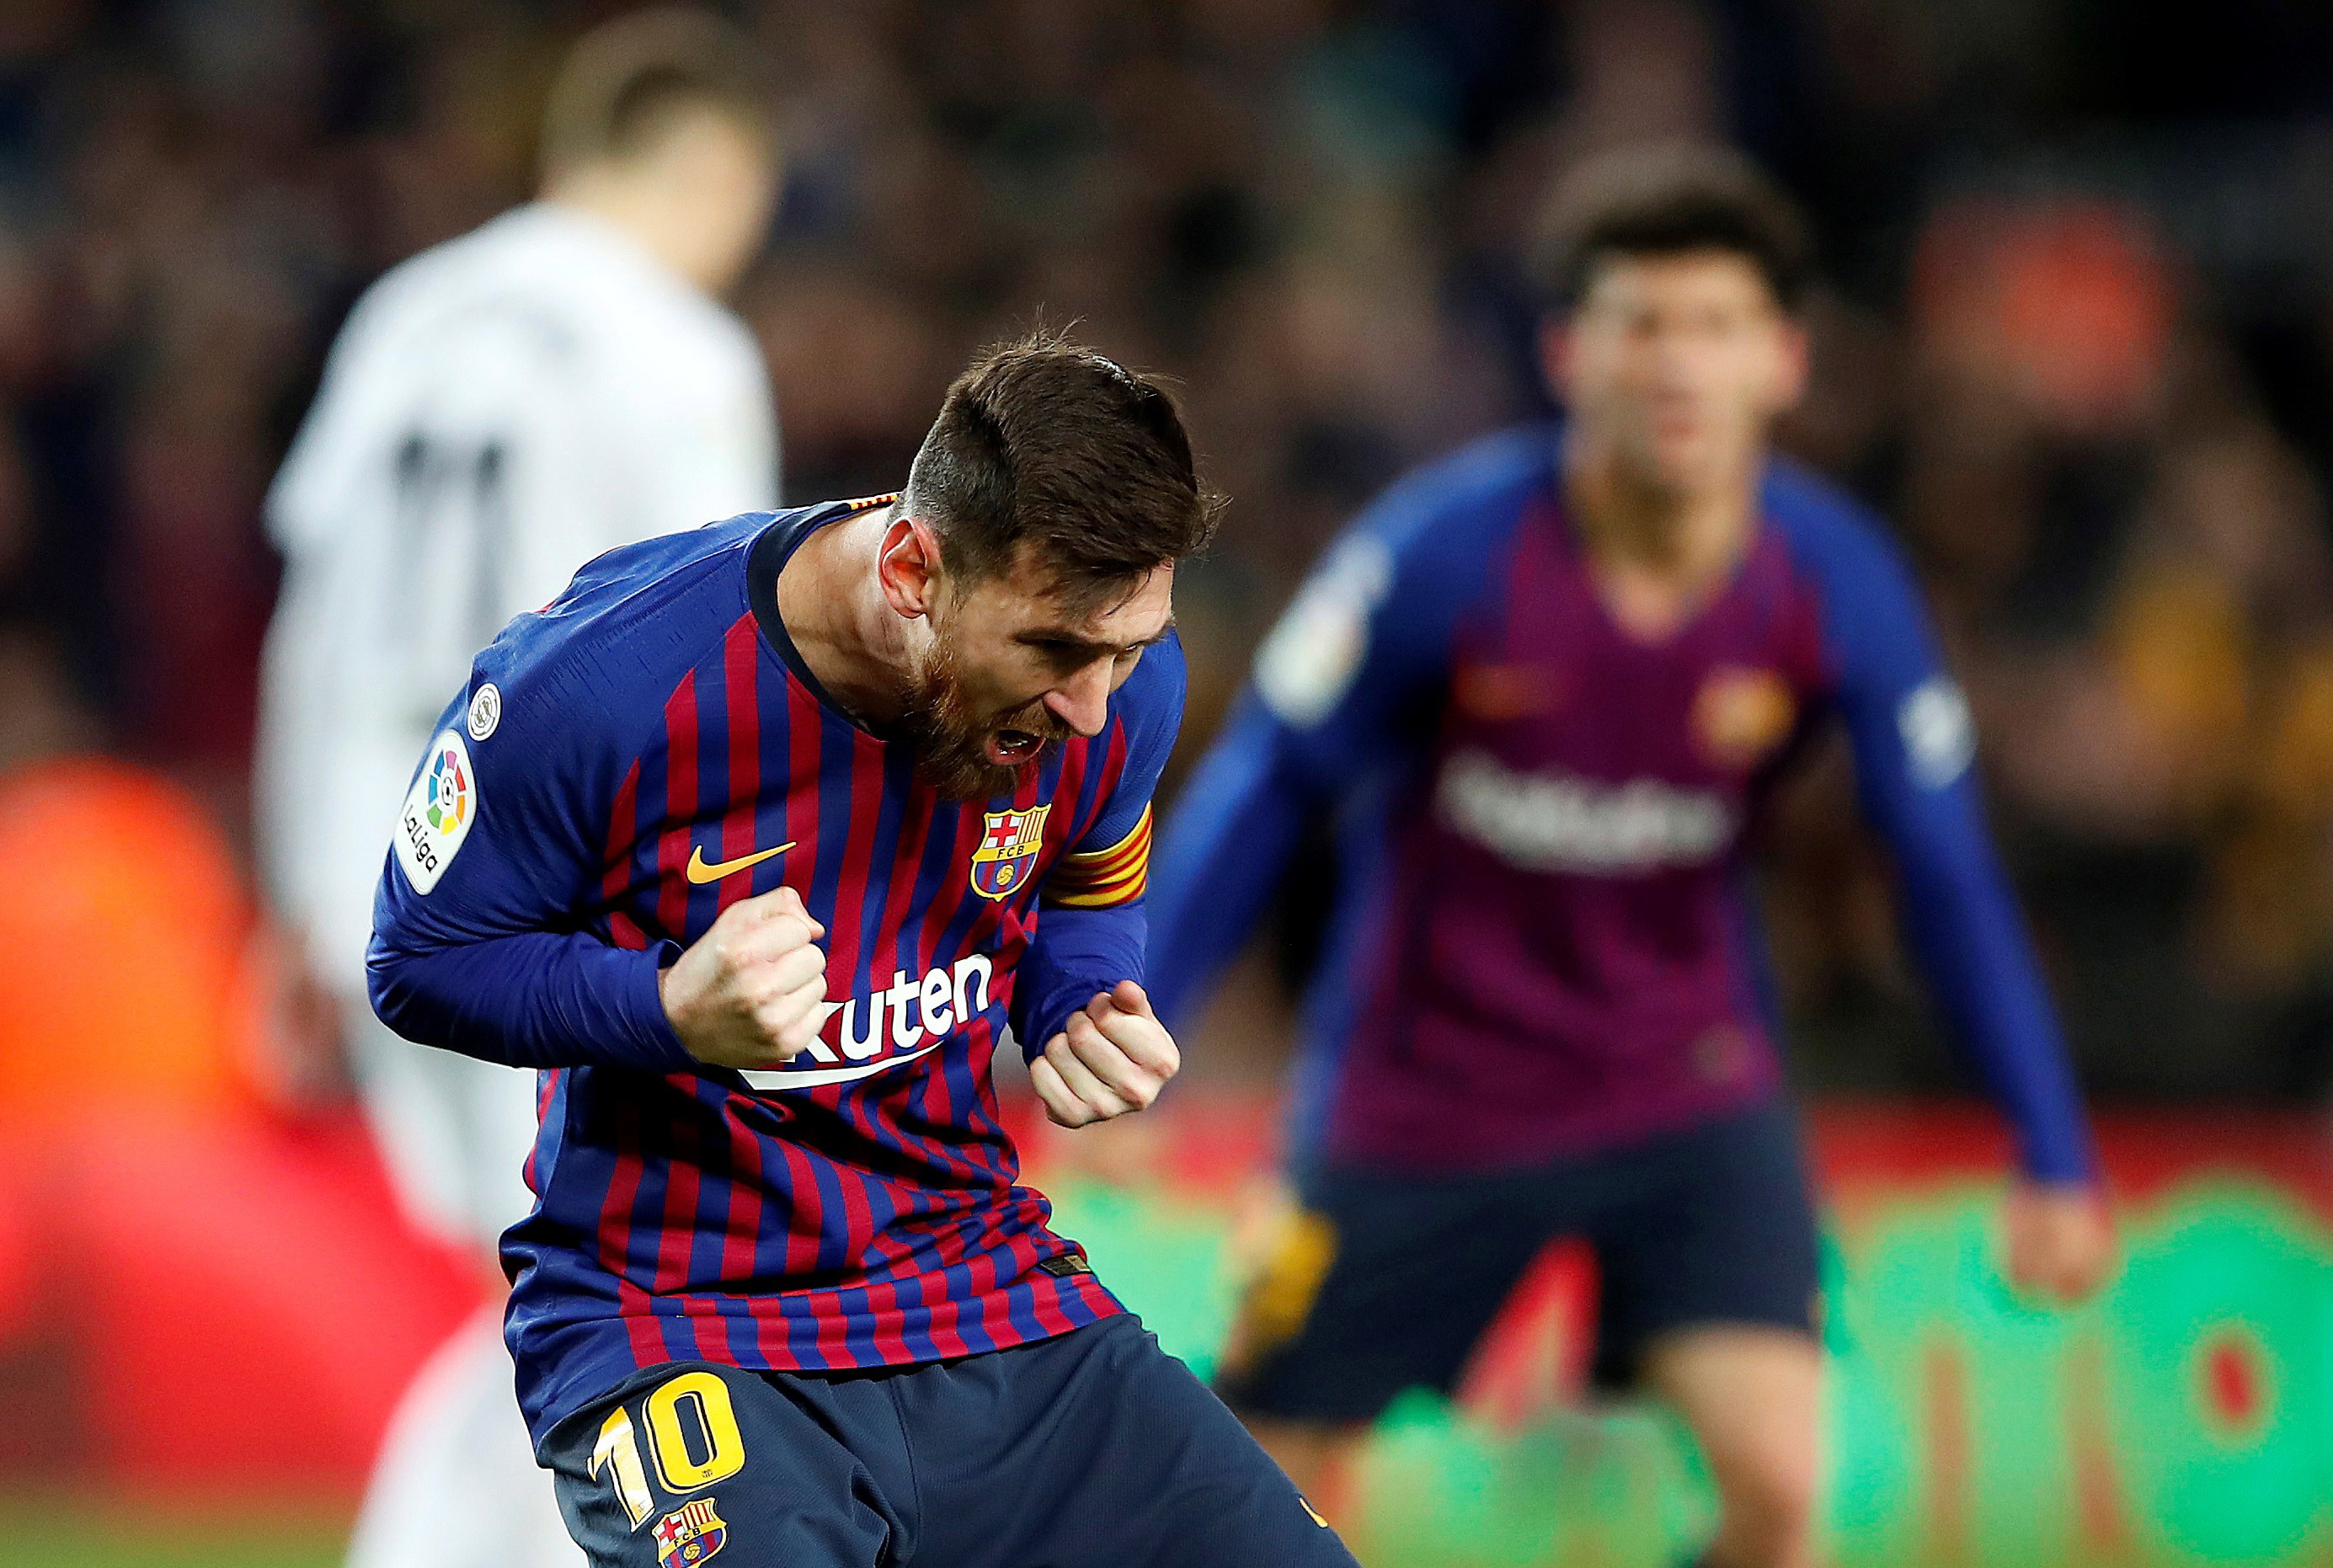 epa07339453 FC Barcelona's Argentinian striker Lionel Messi celebrates after scoring the 2-2 equalizer during their Spanish LaLiga Primera Division soccer match against Valencia CF played at Camp Nou stadium, in Barcelona, Spain, 02 February 2019.  EPA/Alberto Estevez